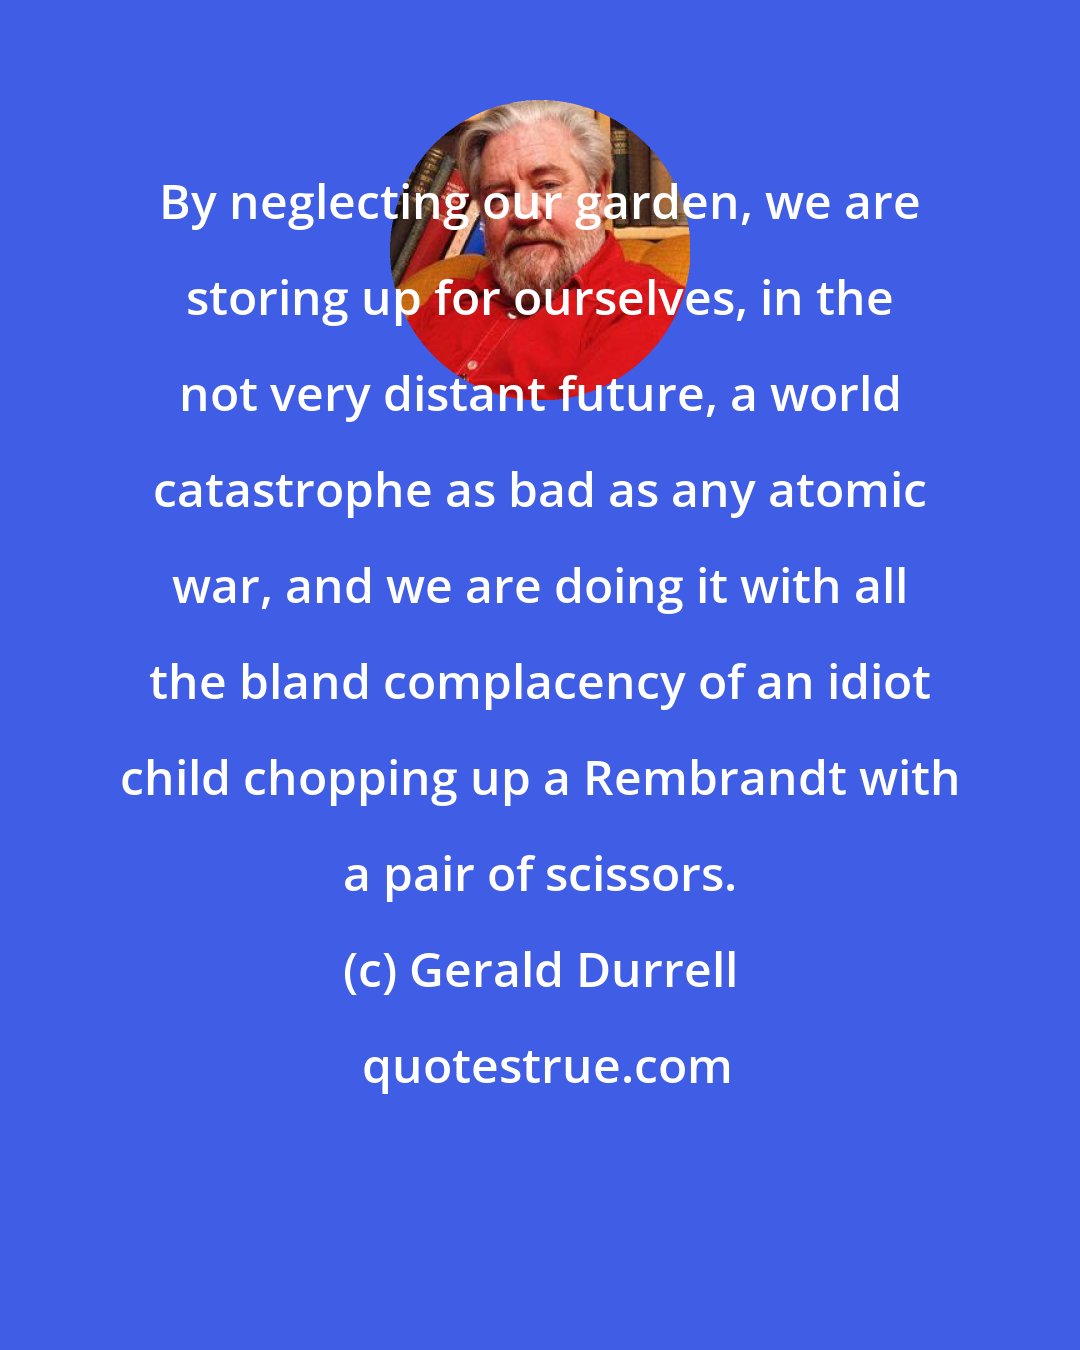 Gerald Durrell: By neglecting our garden, we are storing up for ourselves, in the not very distant future, a world catastrophe as bad as any atomic war, and we are doing it with all the bland complacency of an idiot child chopping up a Rembrandt with a pair of scissors.